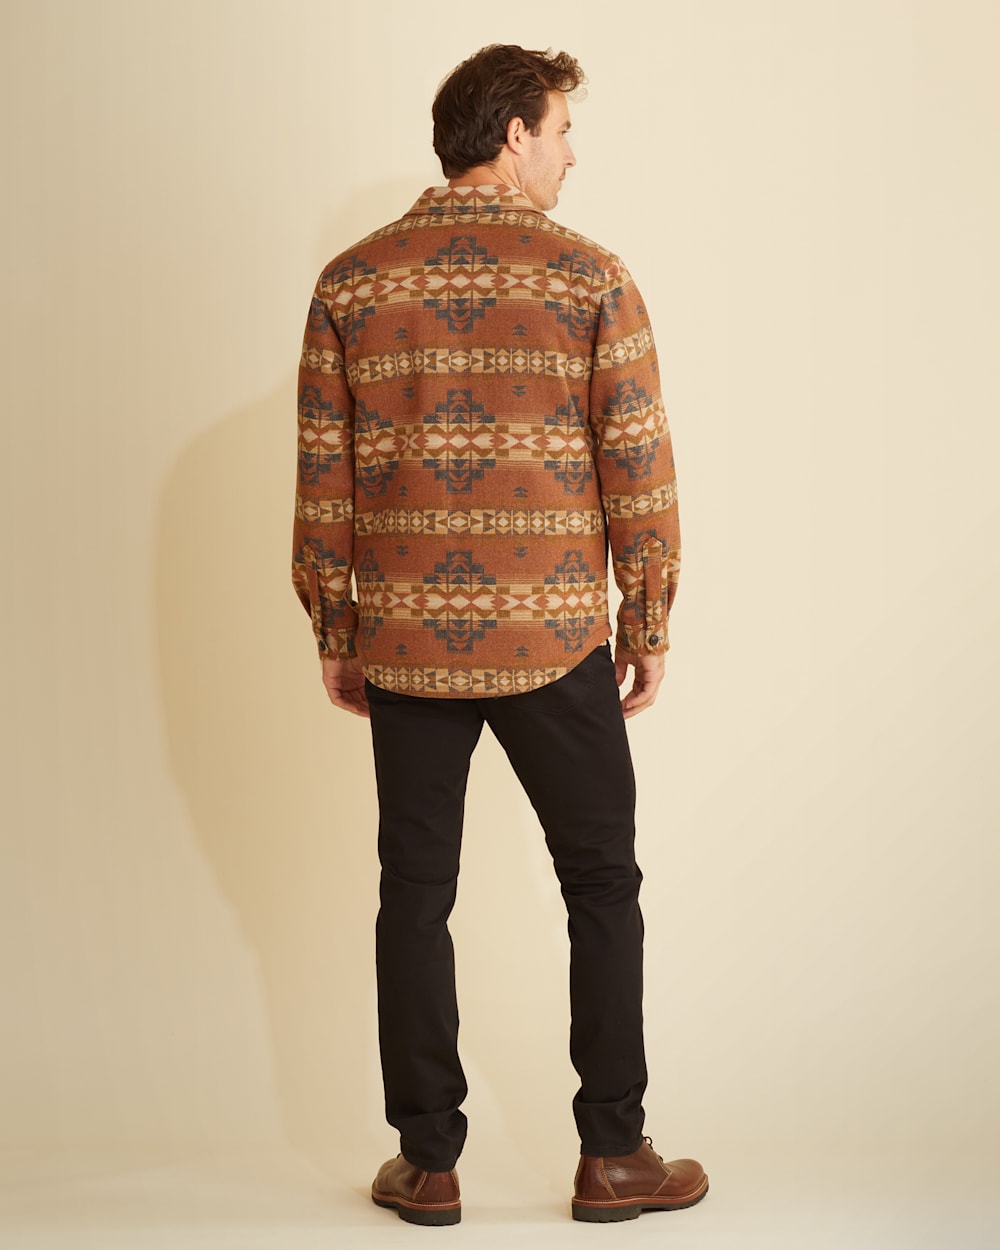 ALTERNATE VIEW OF MEN'S DESERT DAWN QUILTED SHIRT JACKET IN BROWN image number 3